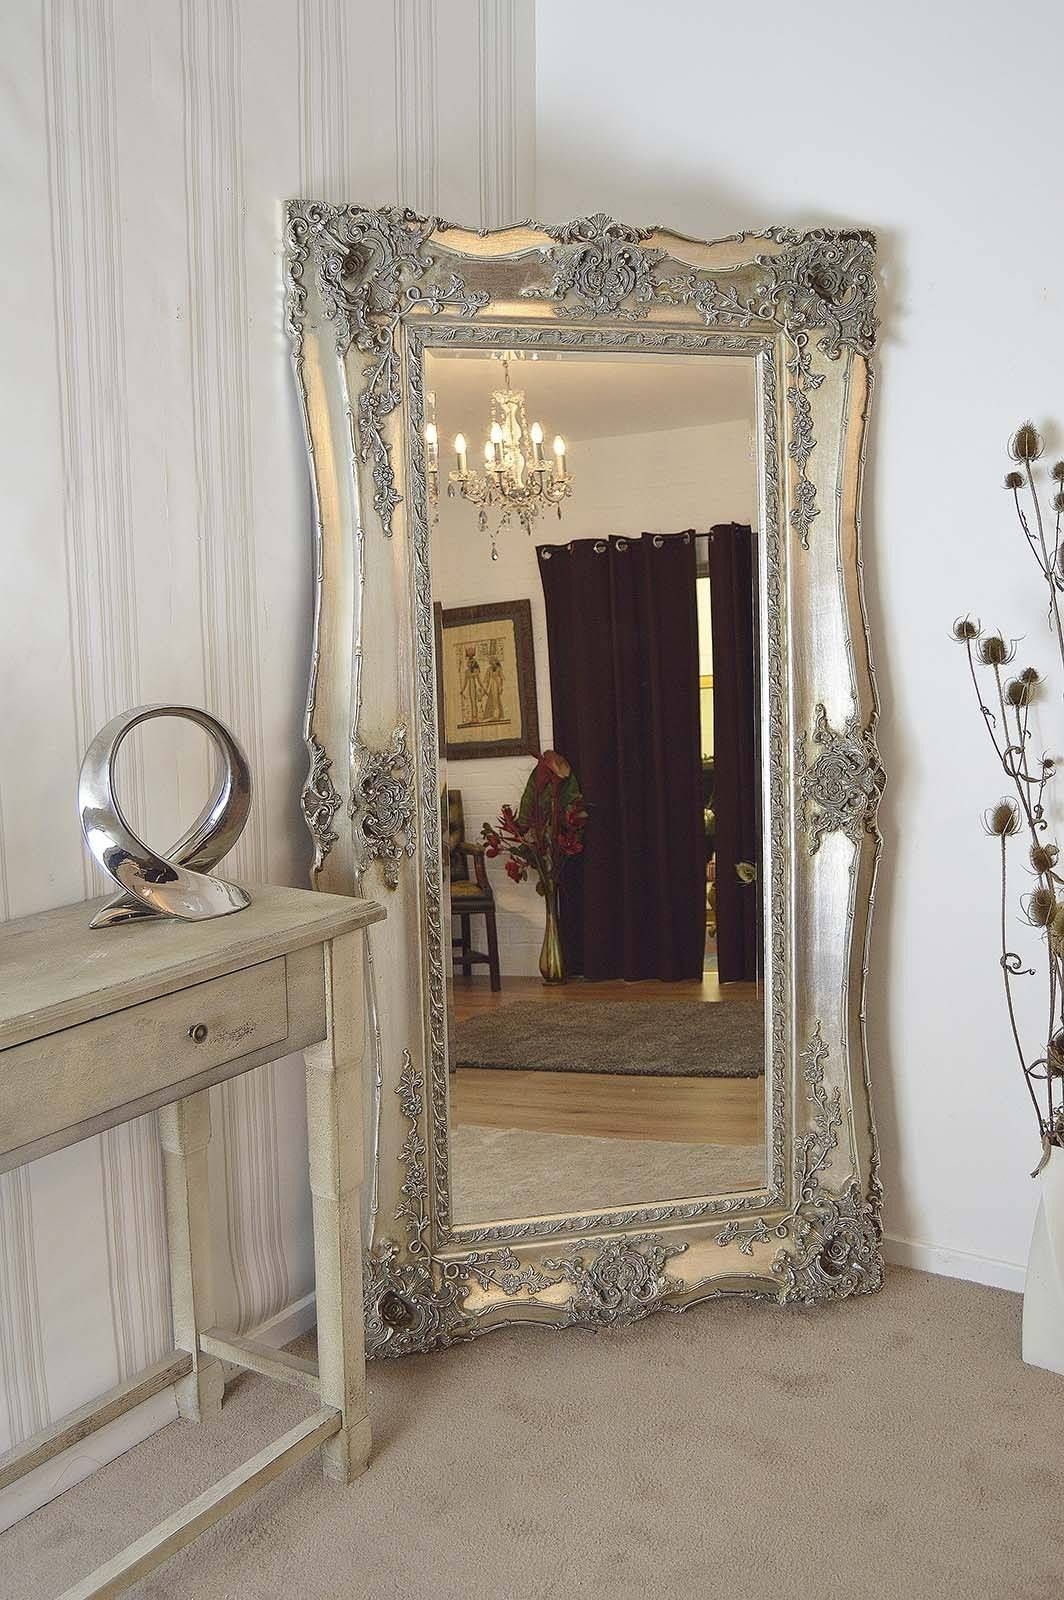 Huge Mirrors For Sale Uk | Vanity Decoration For Huge Mirrors (View 13 of 25)